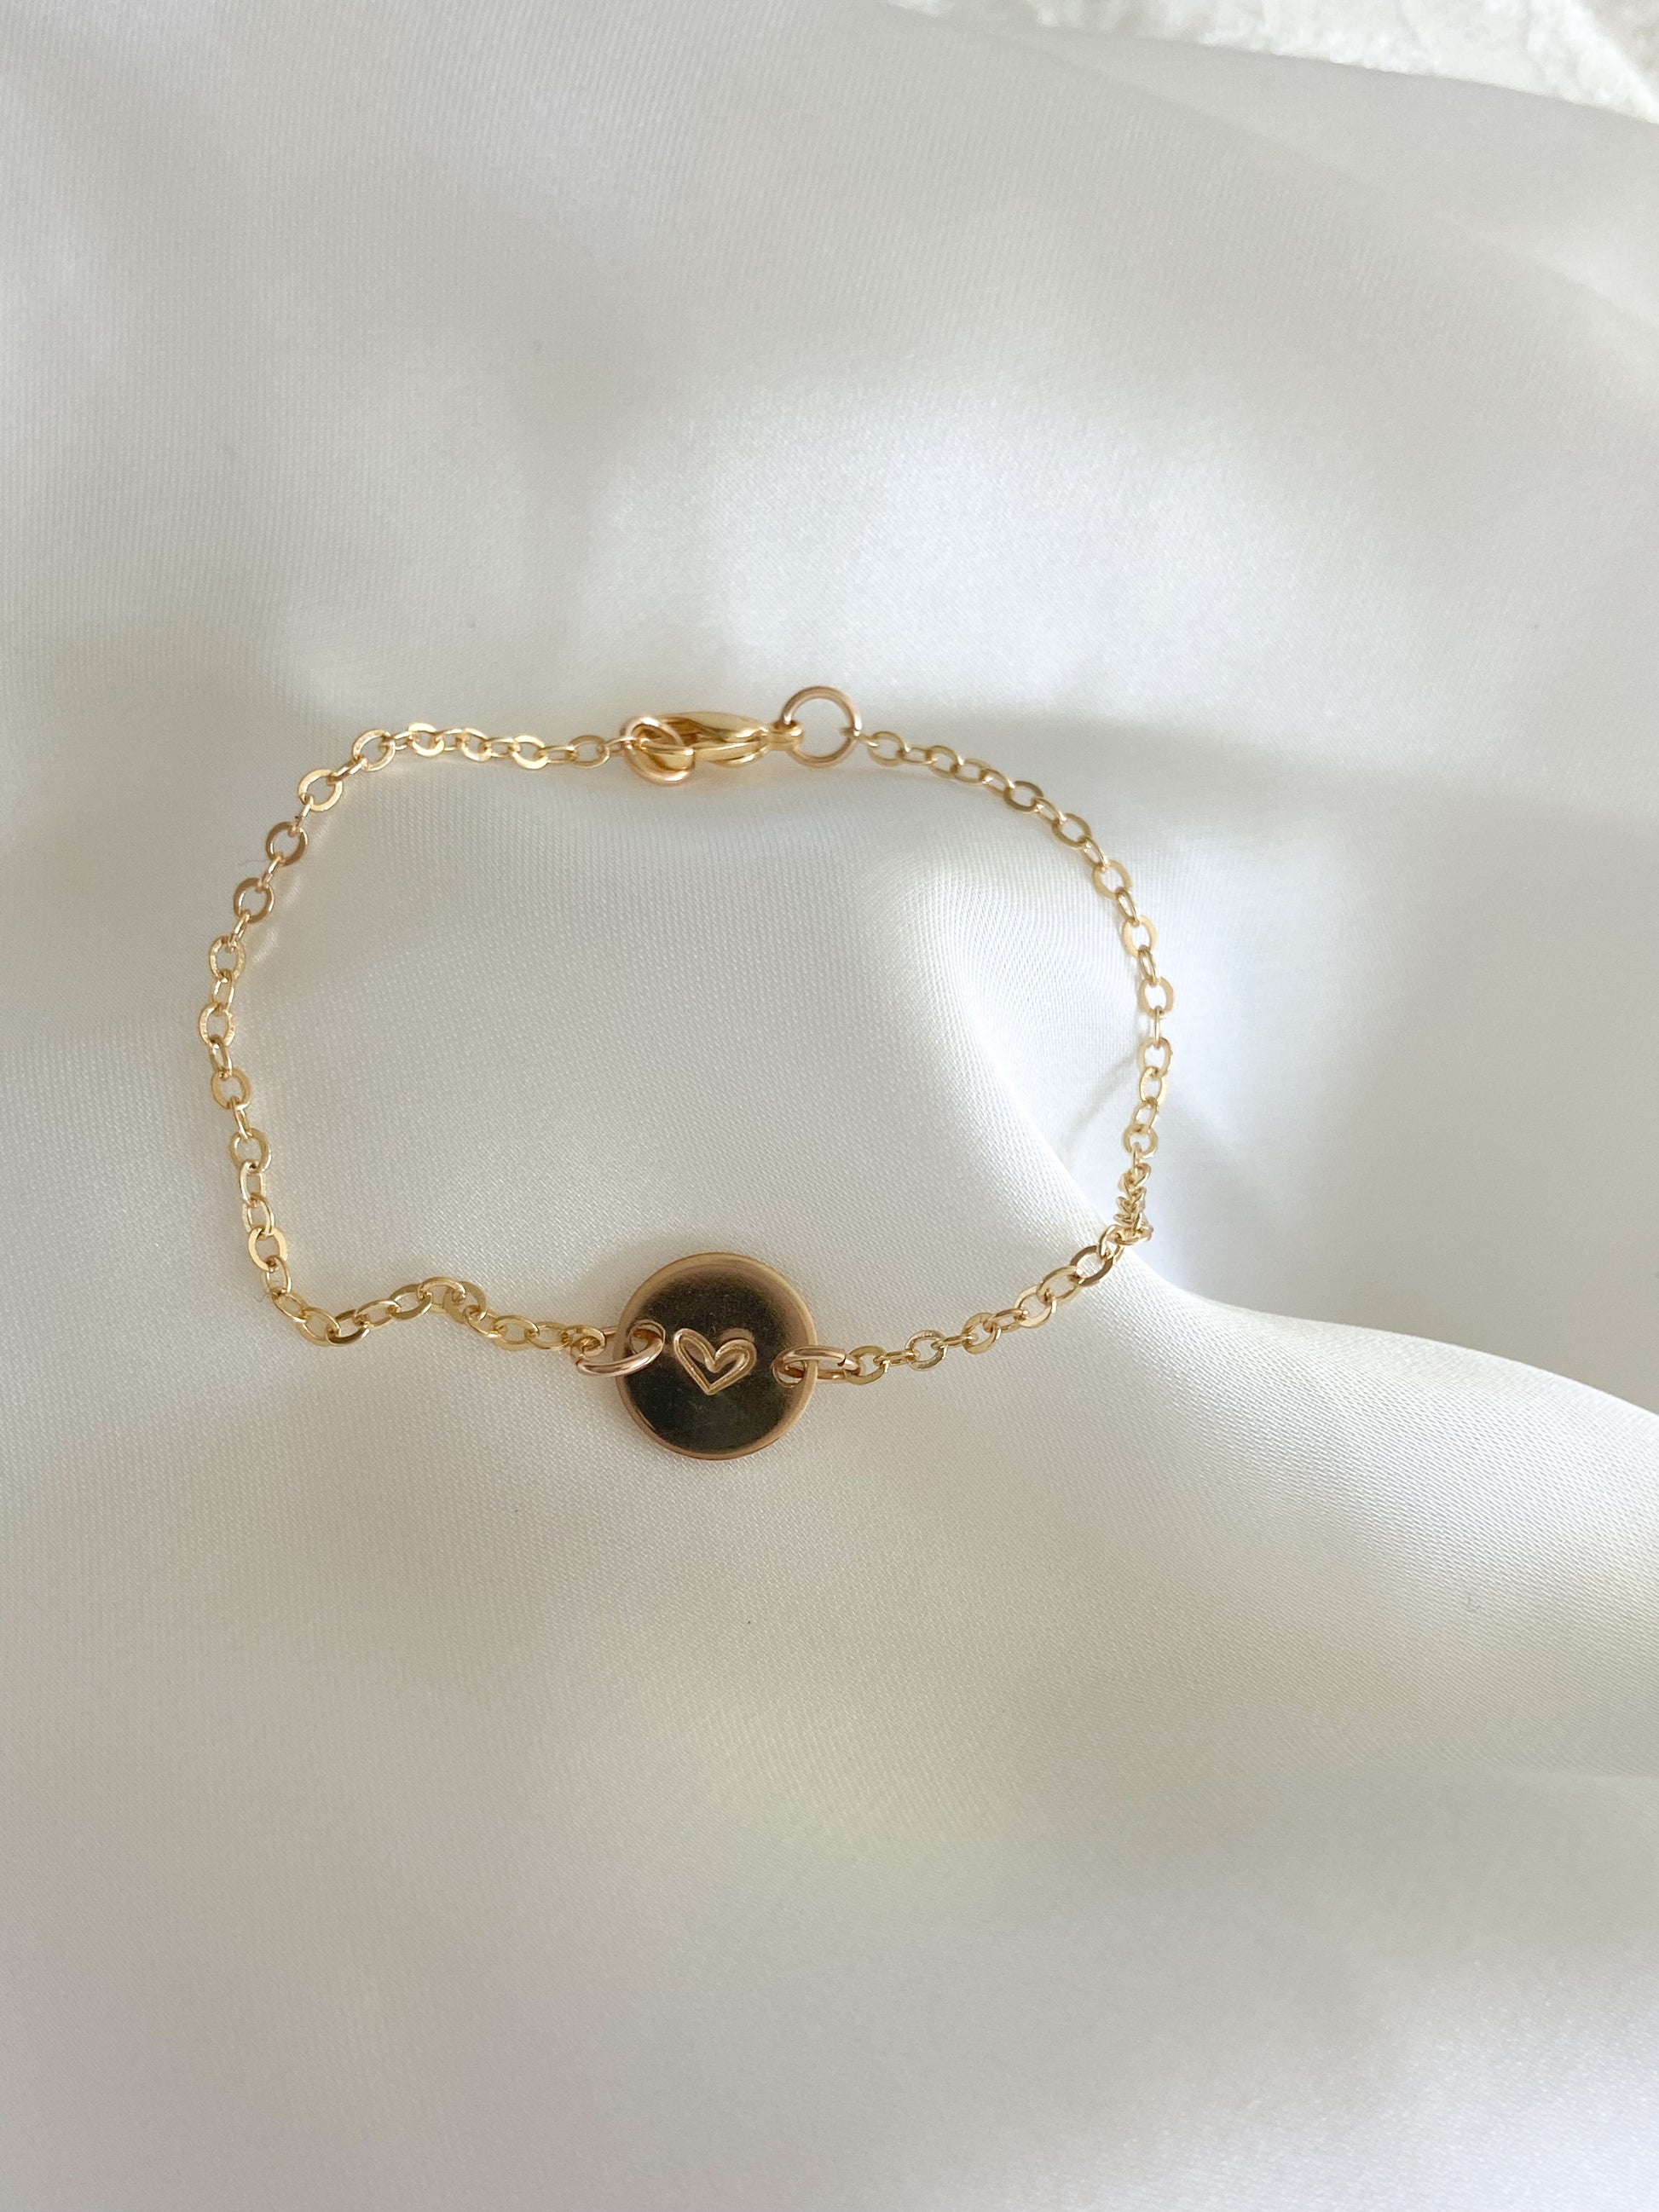 A gold necklace with a heart stamped on it, laying on a white background